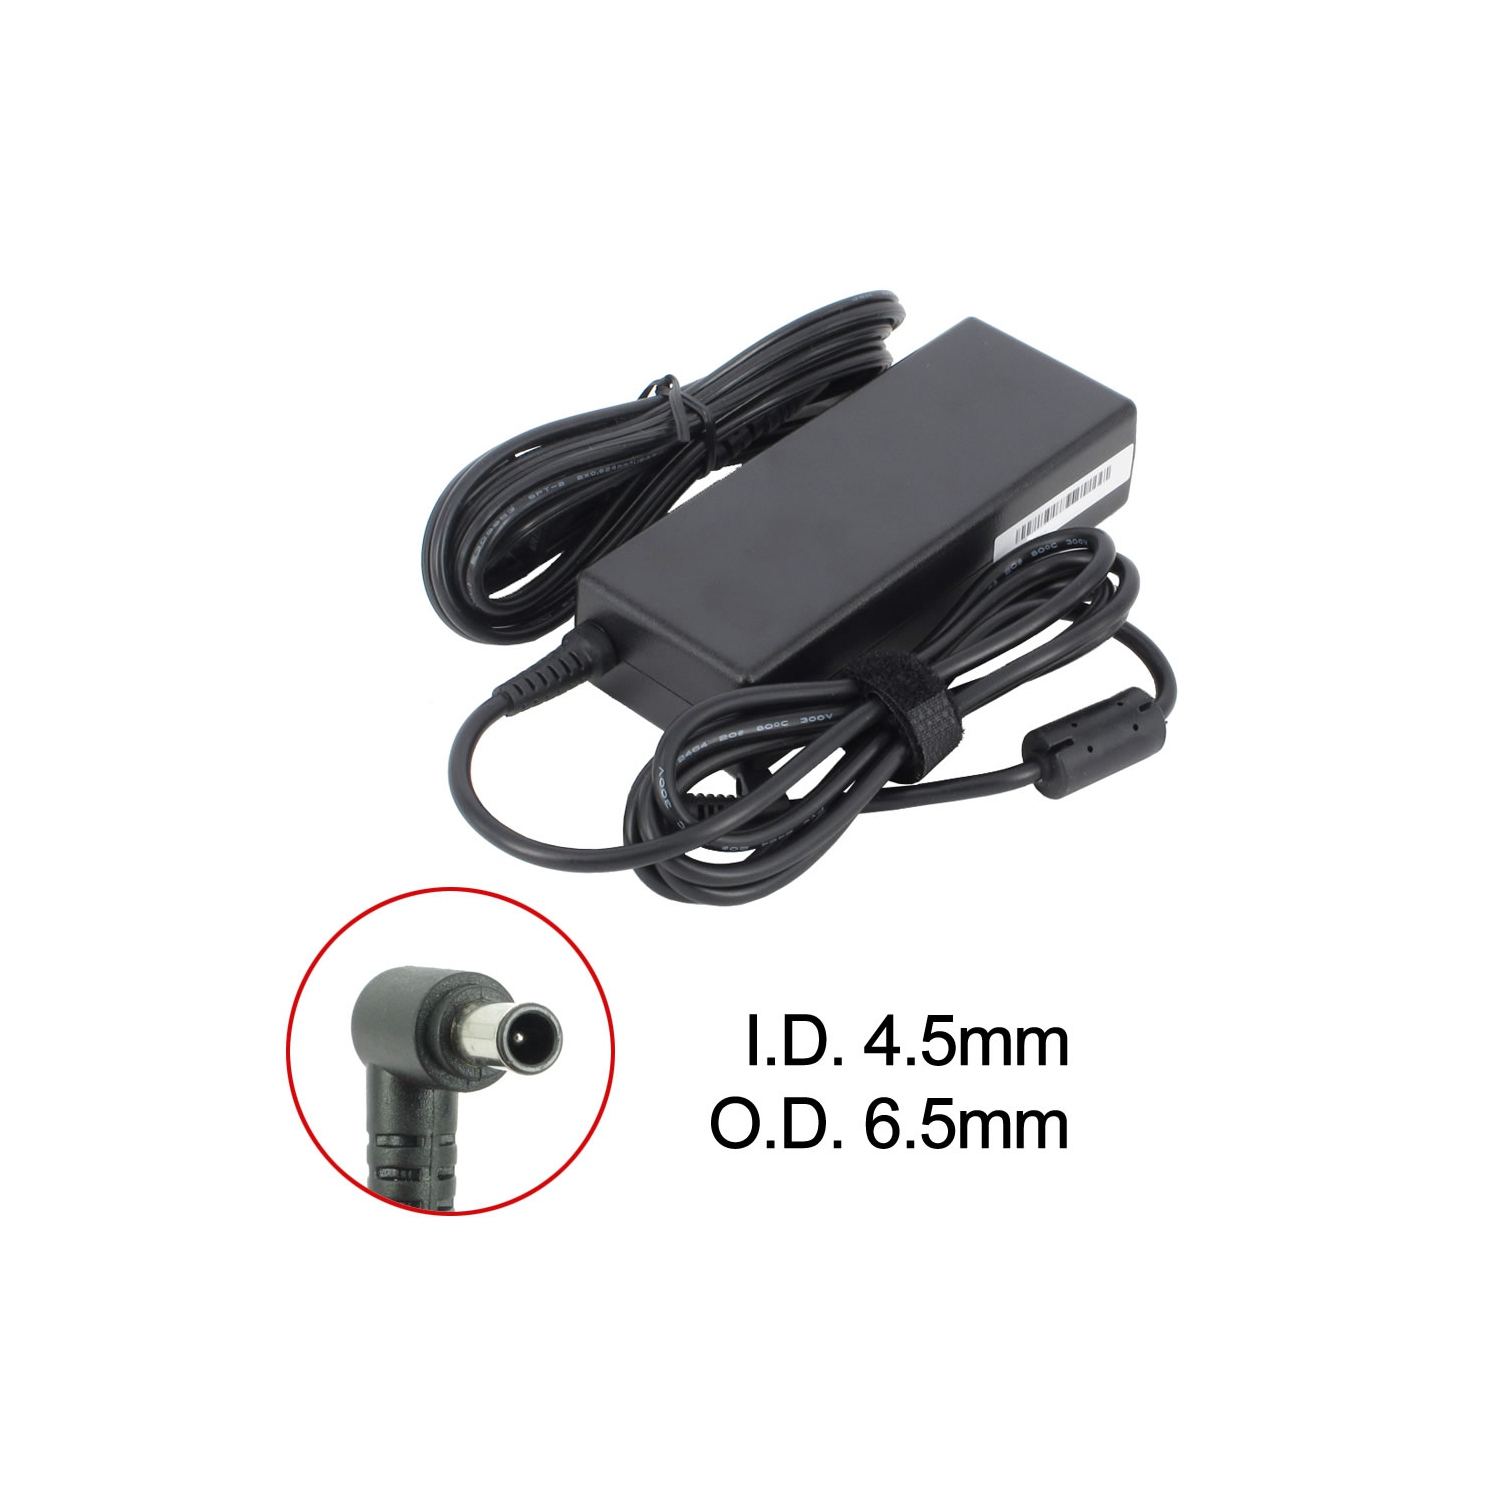 Brand New Laptop AC Adapter for Sony VAIO PCG-FR315B, PCGA-AC19V1, PCGA-AC19V23, VGP-AC19V19, VGP-AC19V27, VGP-AC19V48